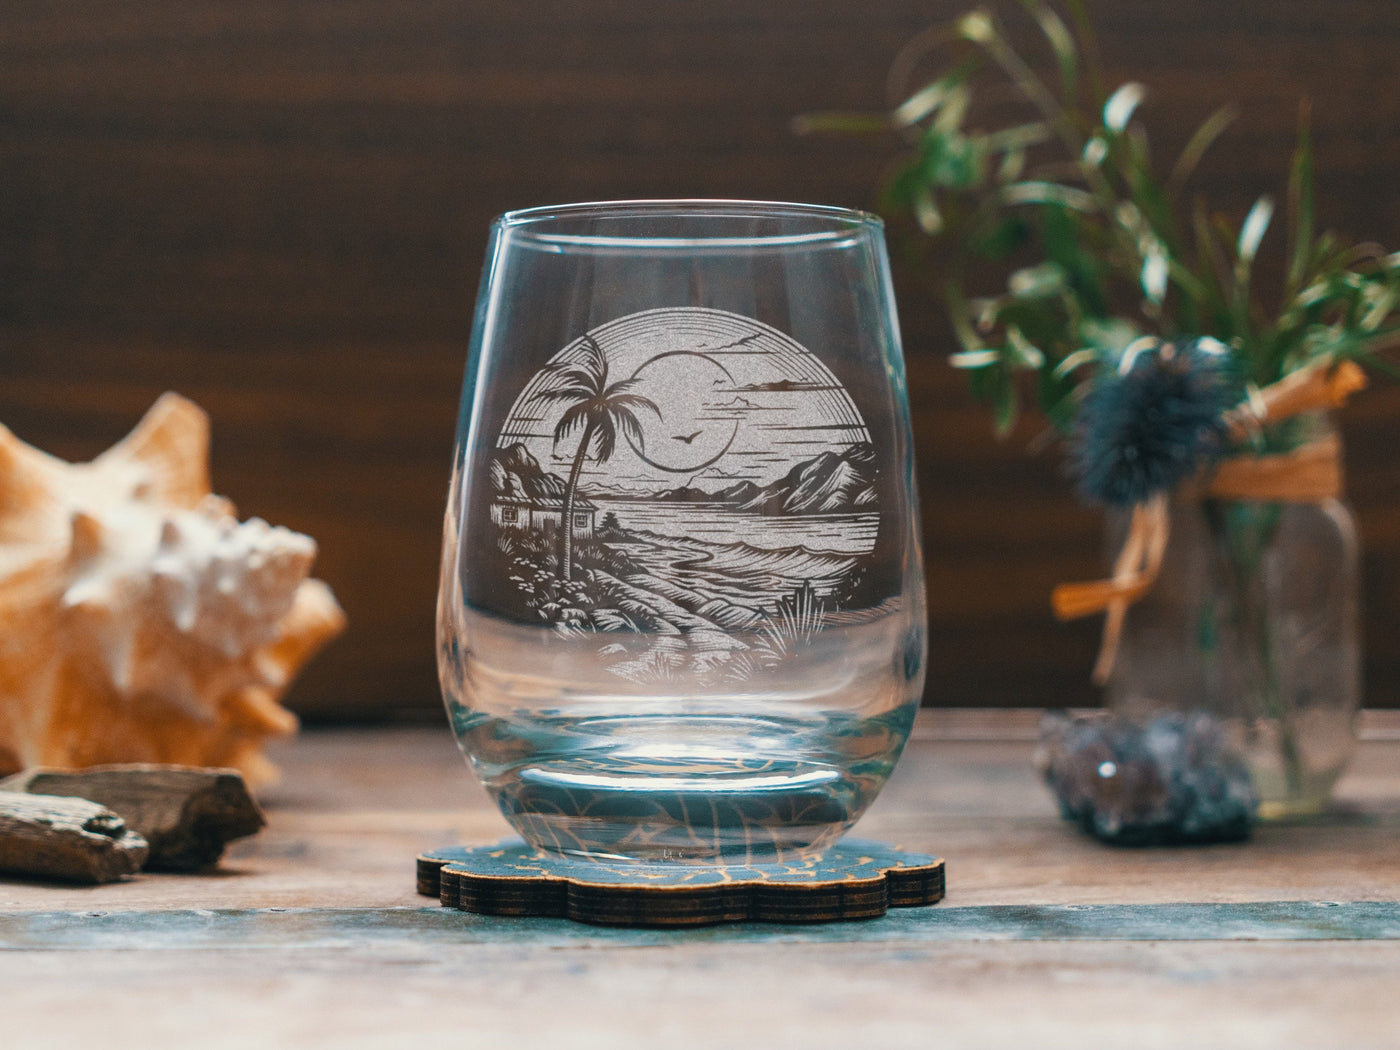 Sandy Beach Scene Glasses | Personalized etched beer, whiskey, wine & cocktail glassware. Beach Coast Lifestyle gift, Tropical Summer Vibes.